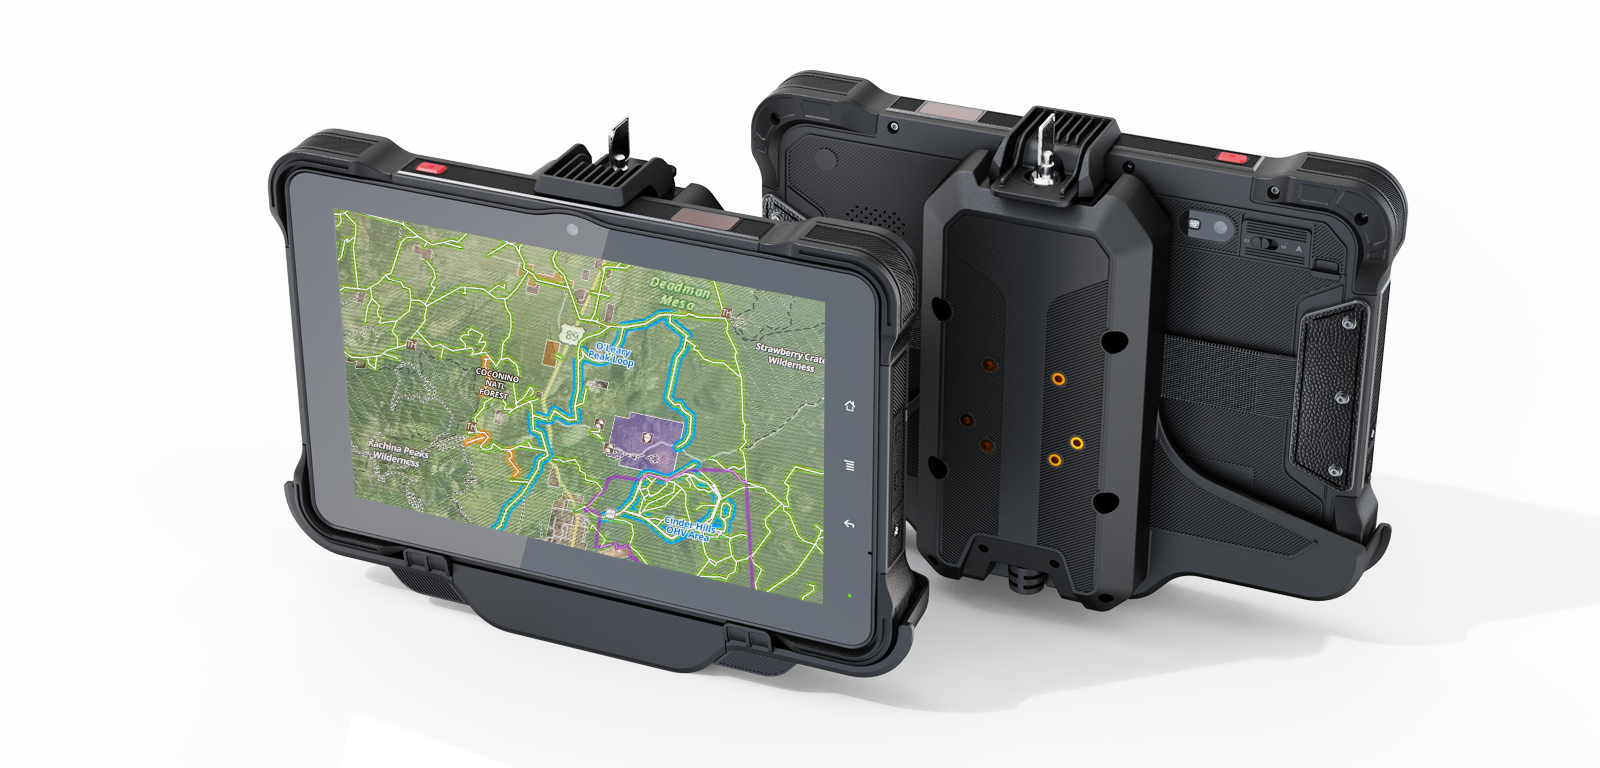 Lil-Squatch 7” Rugged Off-Road Vehicle GPS with Docking